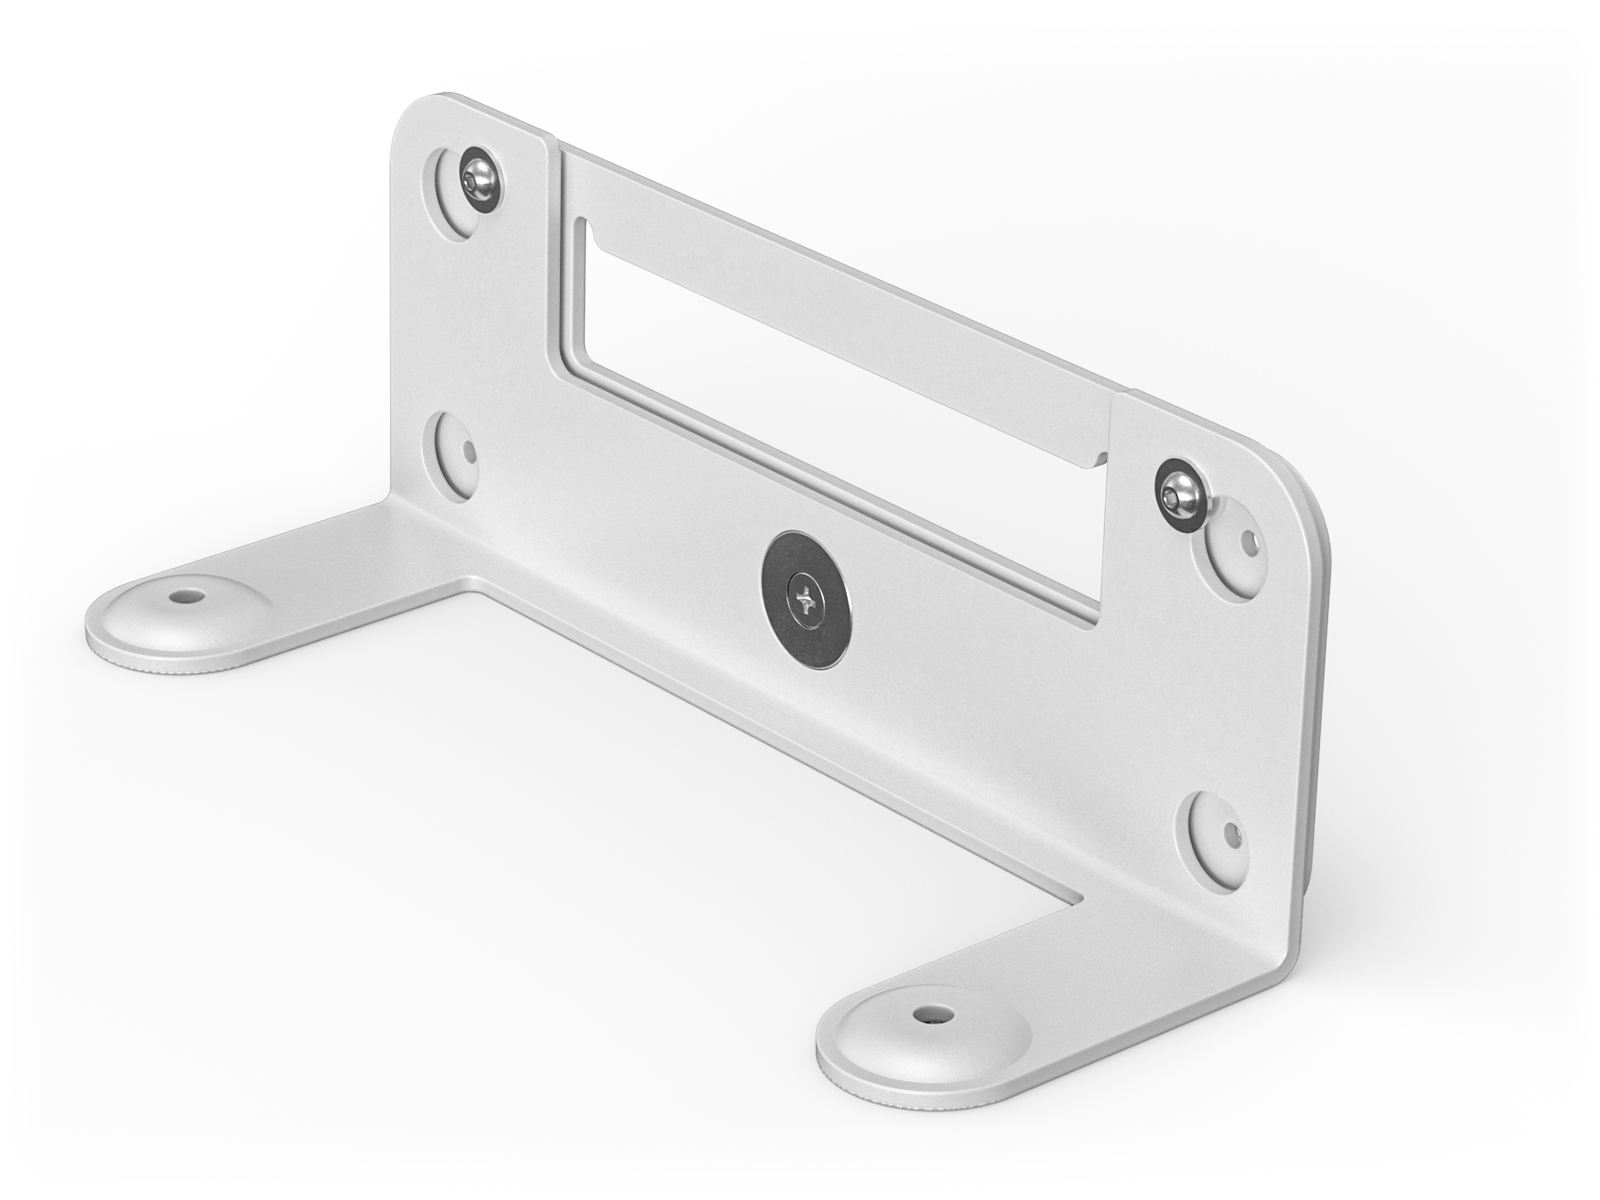  WALL MOUNT FOR VIDEO BARS WHITE N/A WW